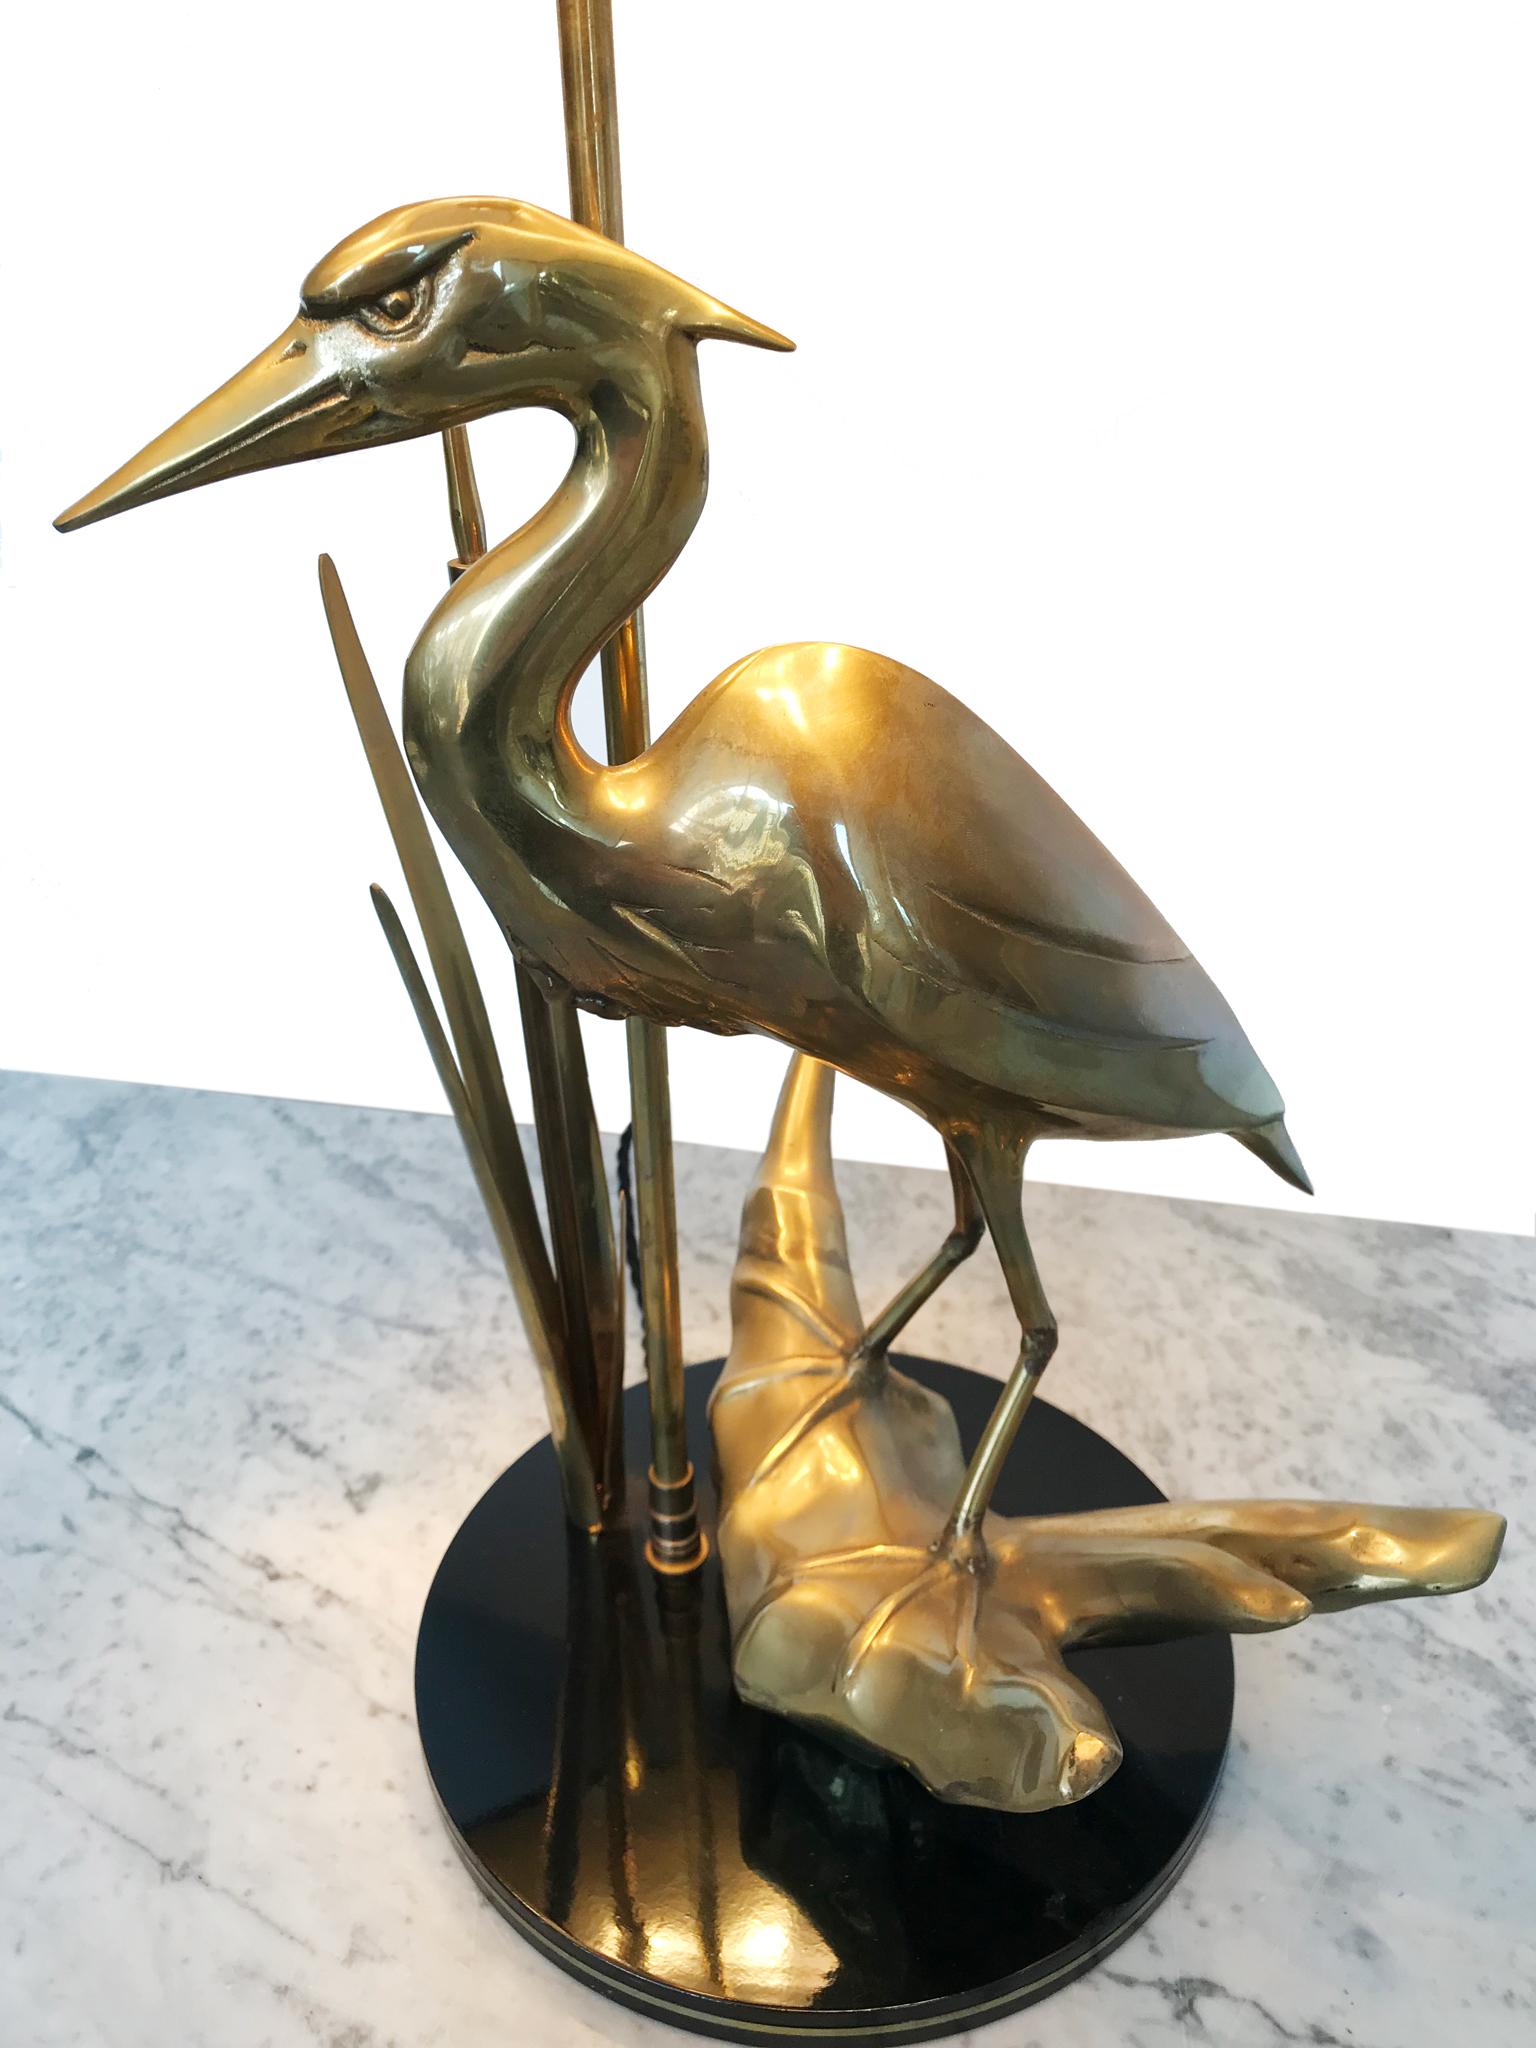 French MIDCENTURY SCULPTURAL LAMP in Brass with Heron 1969 Hollywood Regency Style